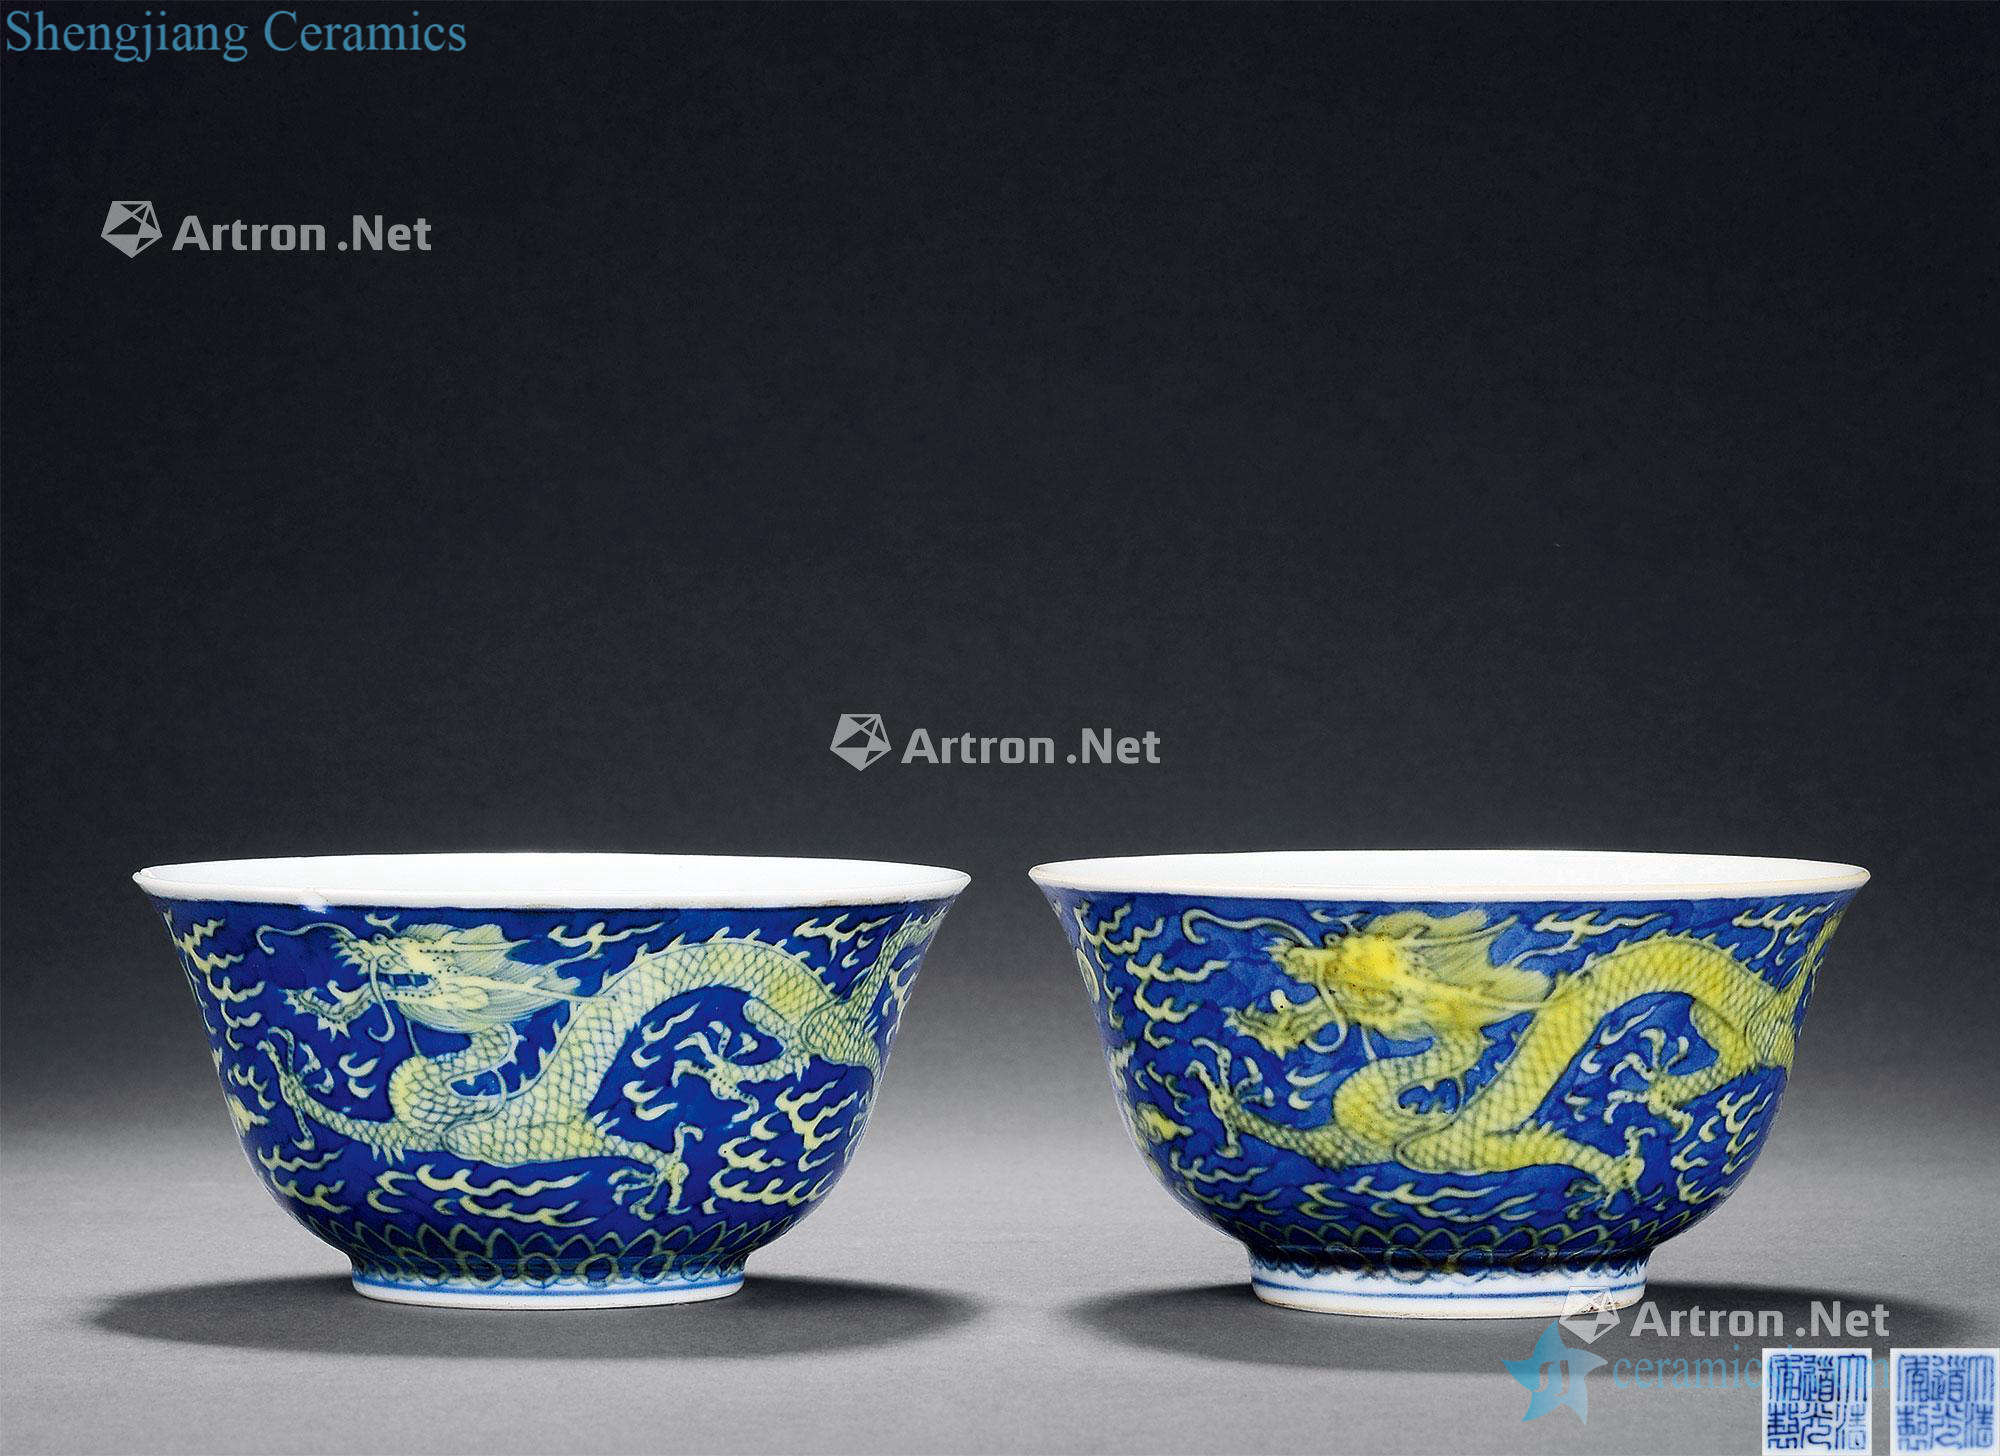 Qing daoguang Blue Huang Cai ssangyong cast bead green-splashed bowls (a)